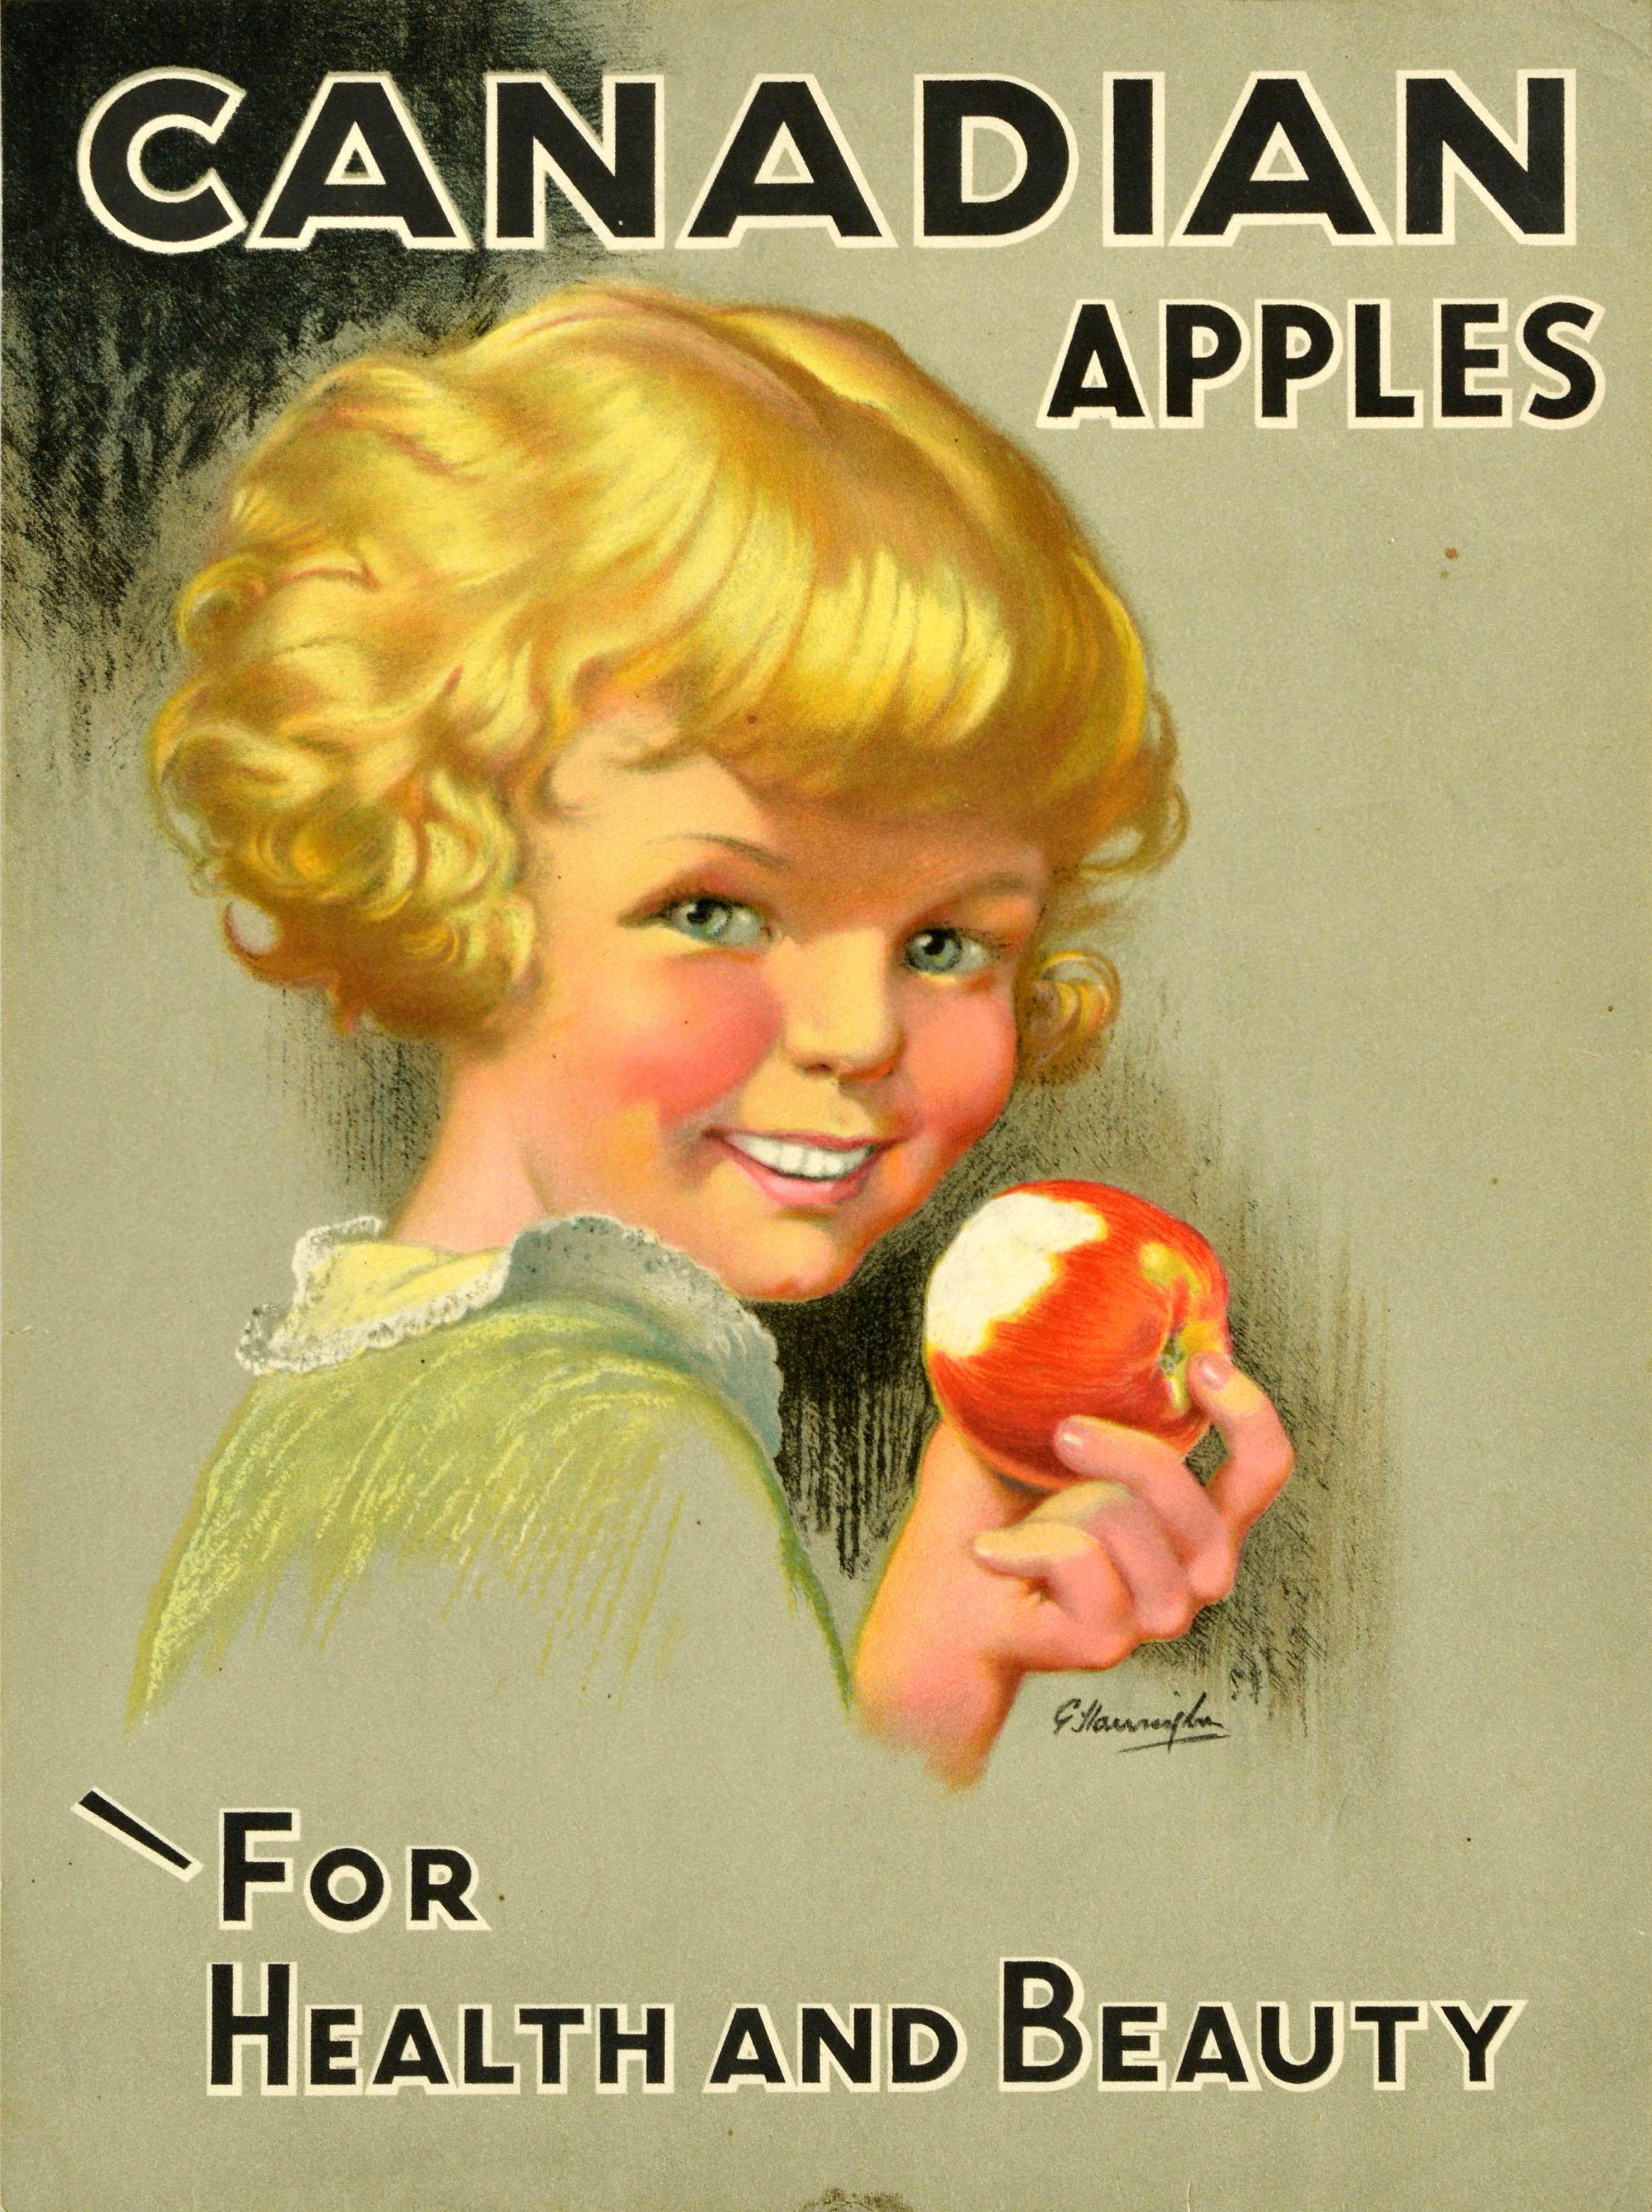 Unknown Print - Original Vintage Food Advertising Poster Canadian Apples For Health And Beauty